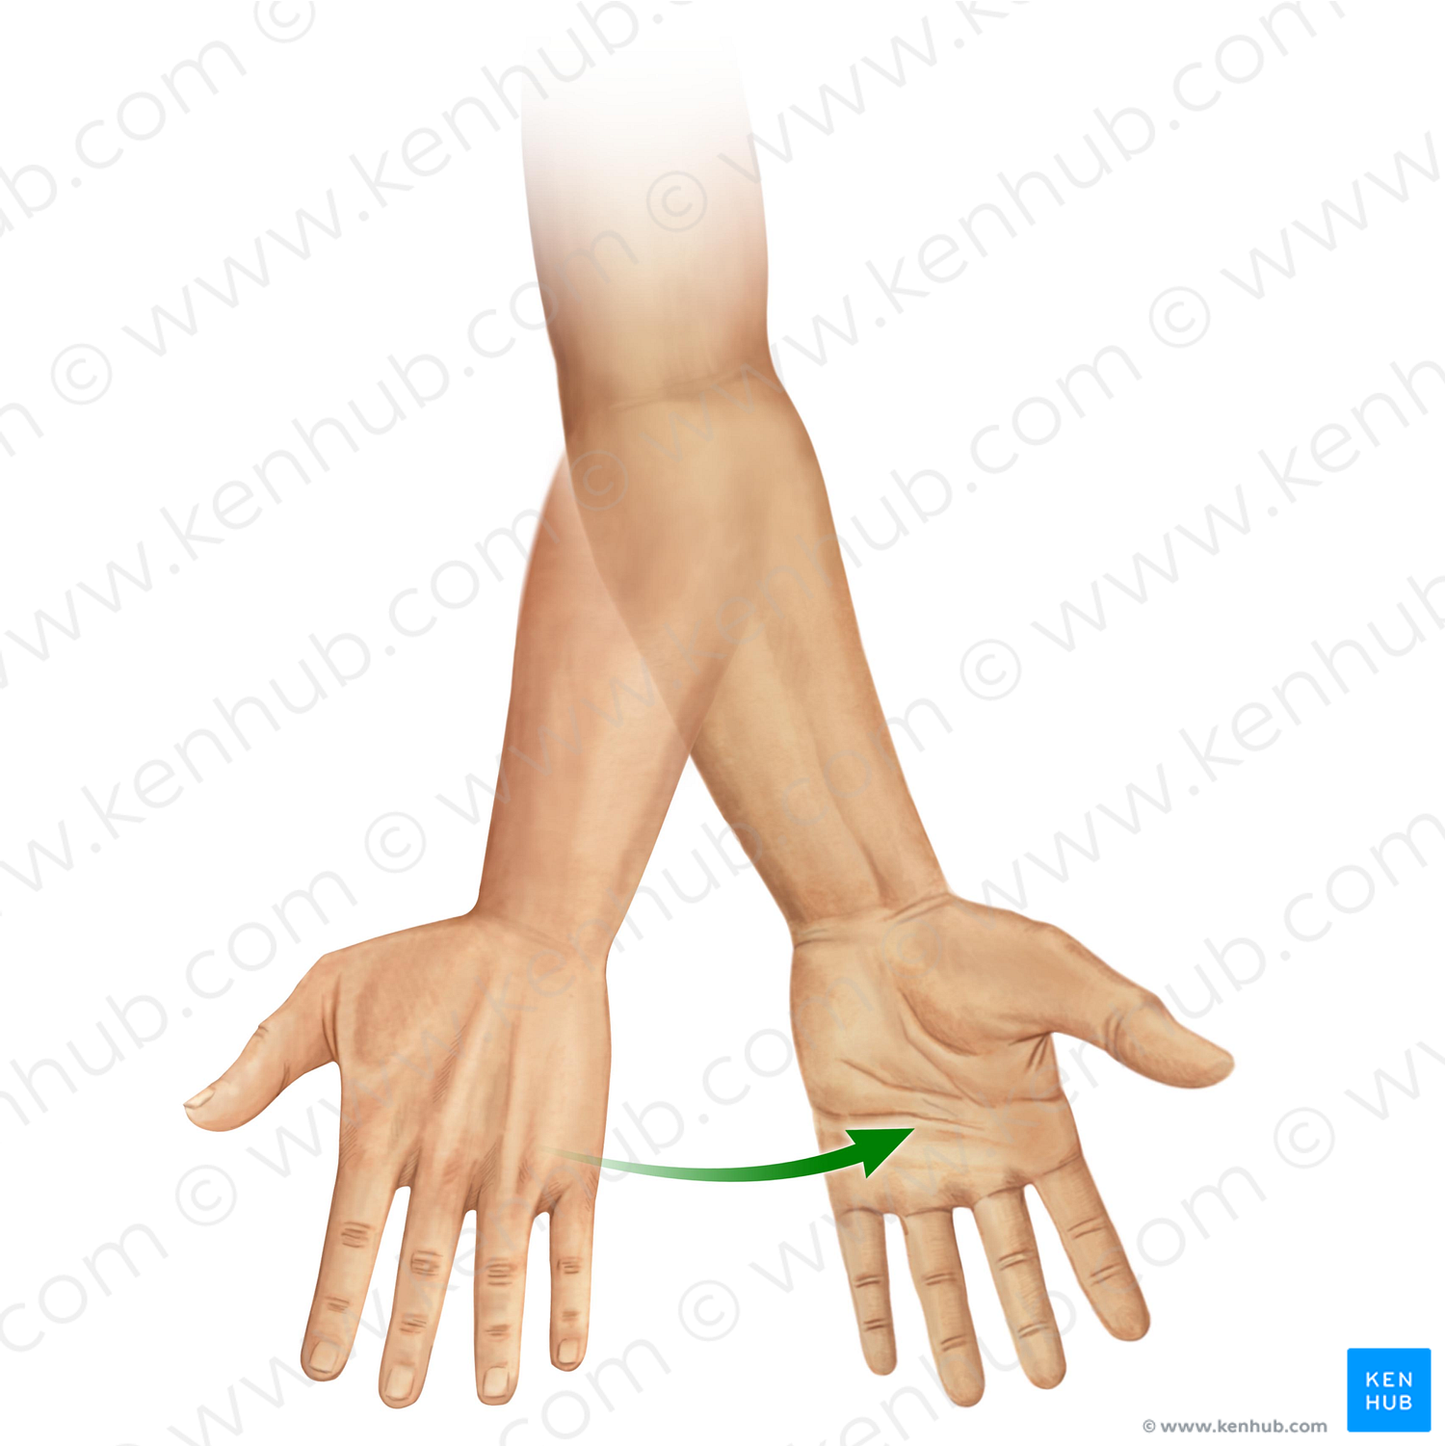 Supination of forearm (#11033)